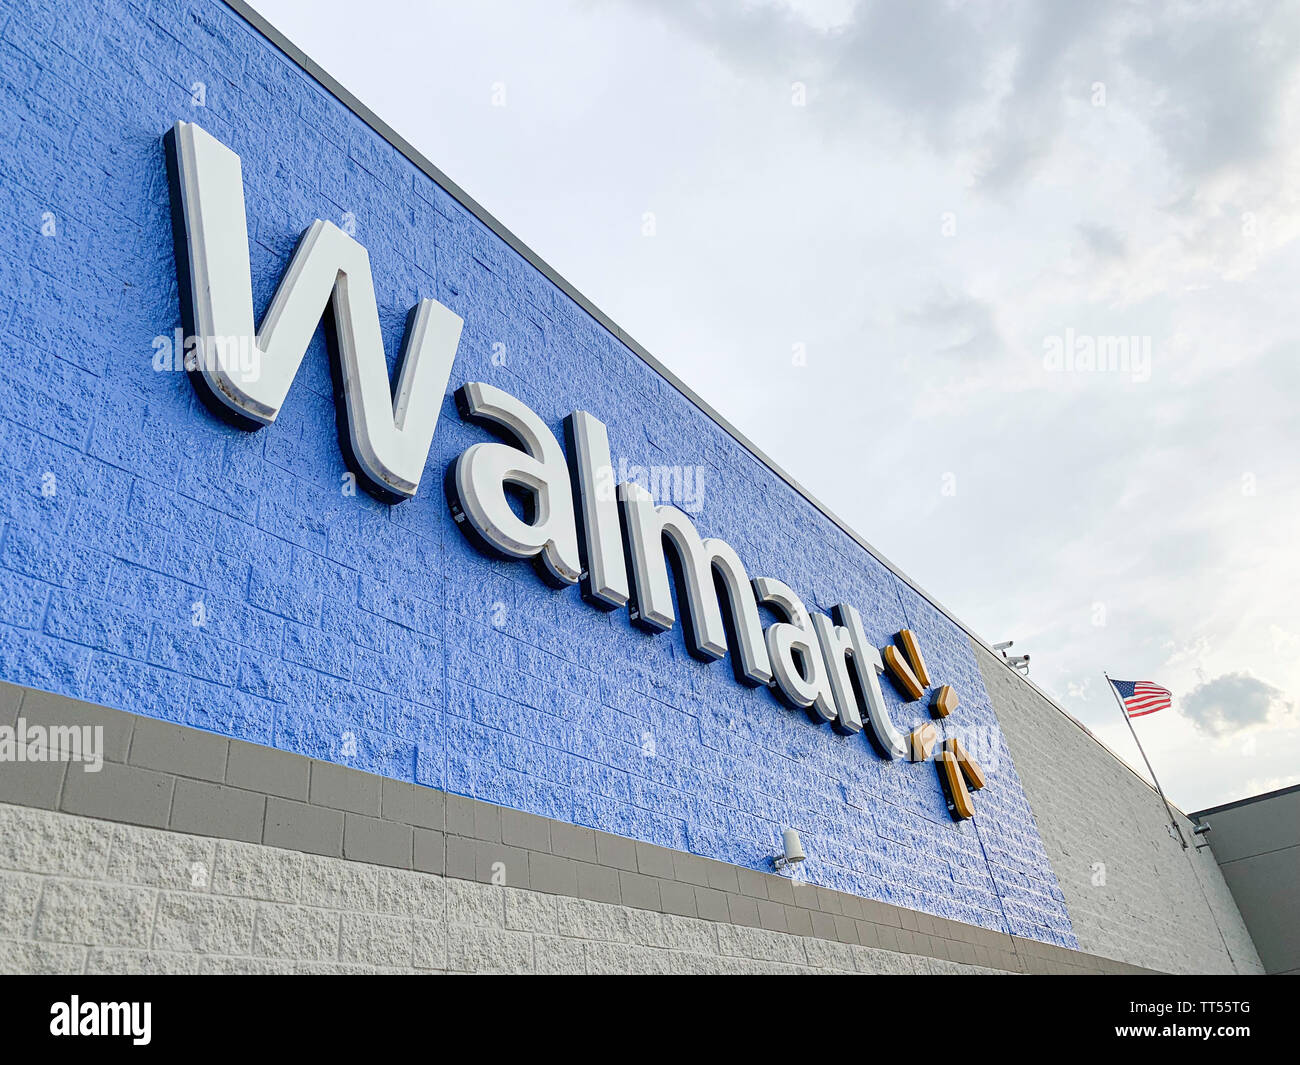 The prominent lighted 3D plastic sign of the Walmart Superstore located in Vidalia, Georgia, USA, is featured on the facade. Stock Photo